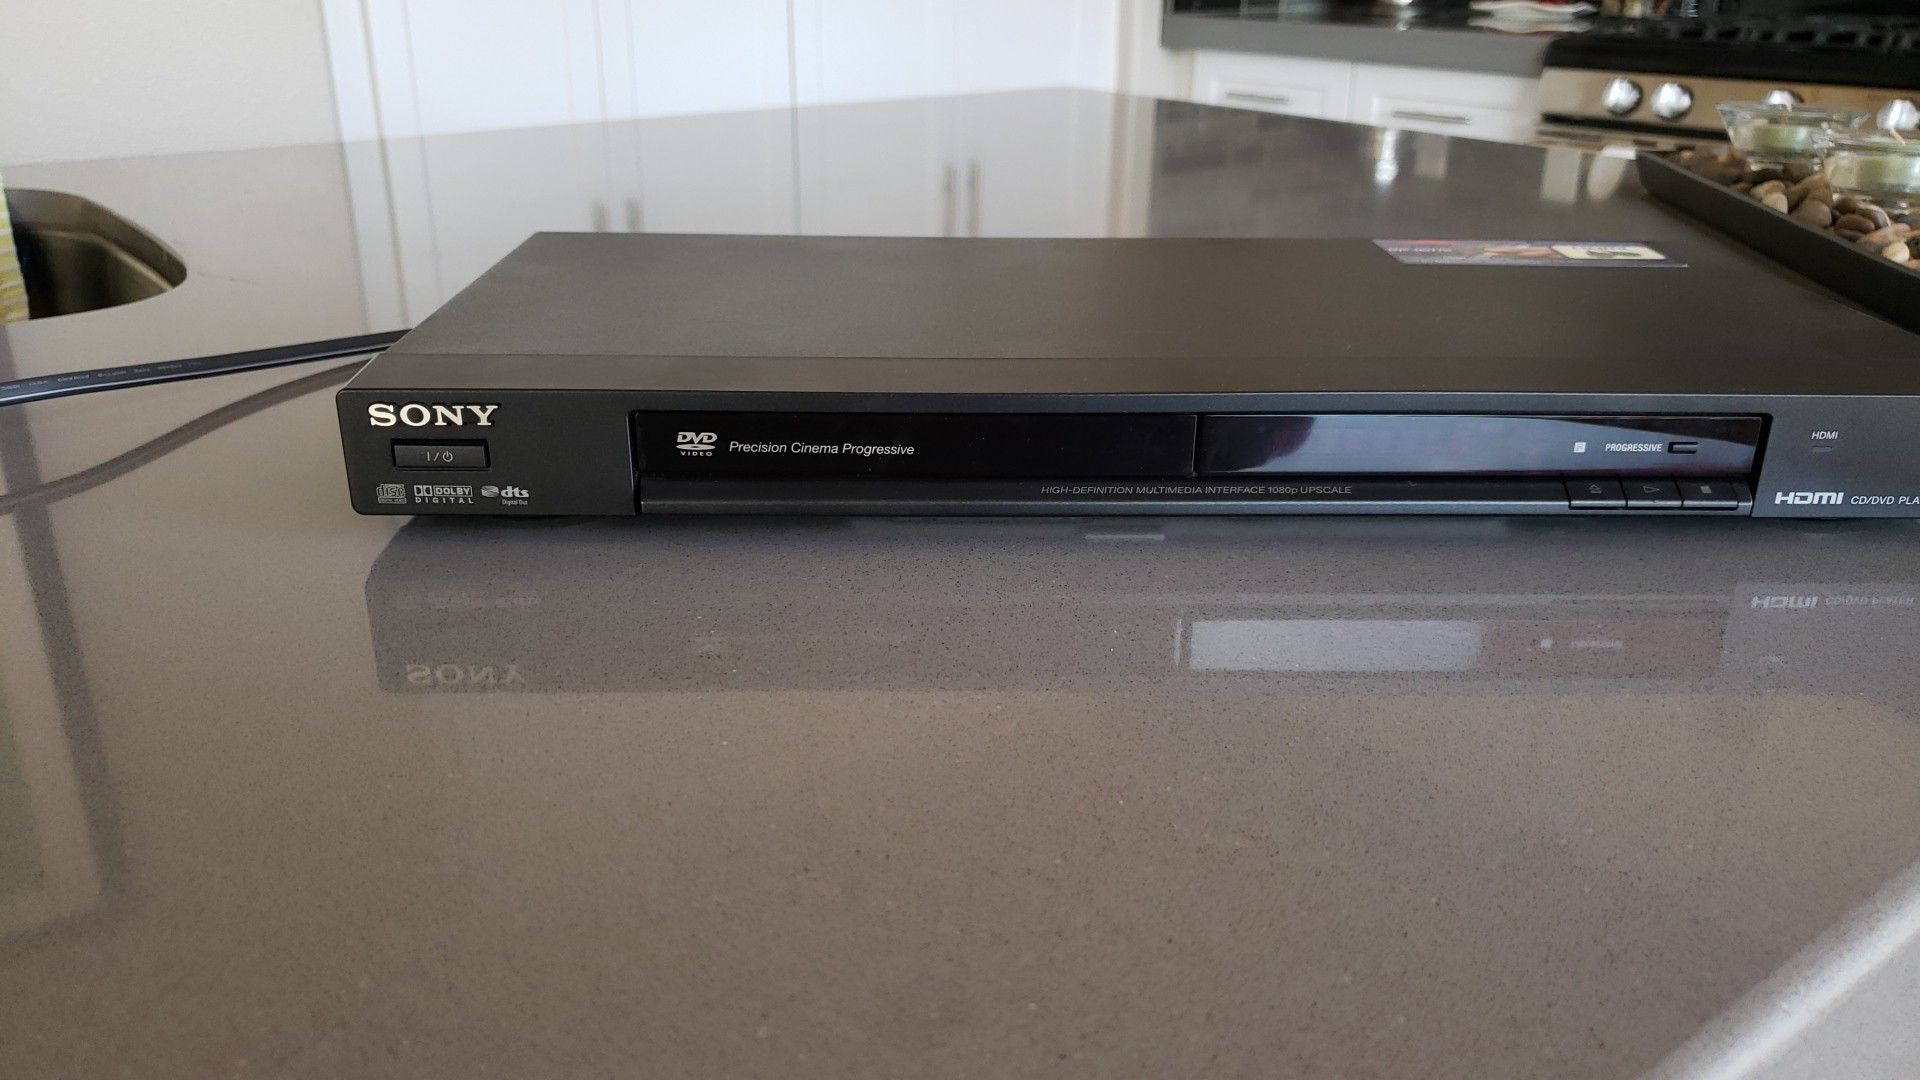 Sony DVD player new out of box with HDMI cord